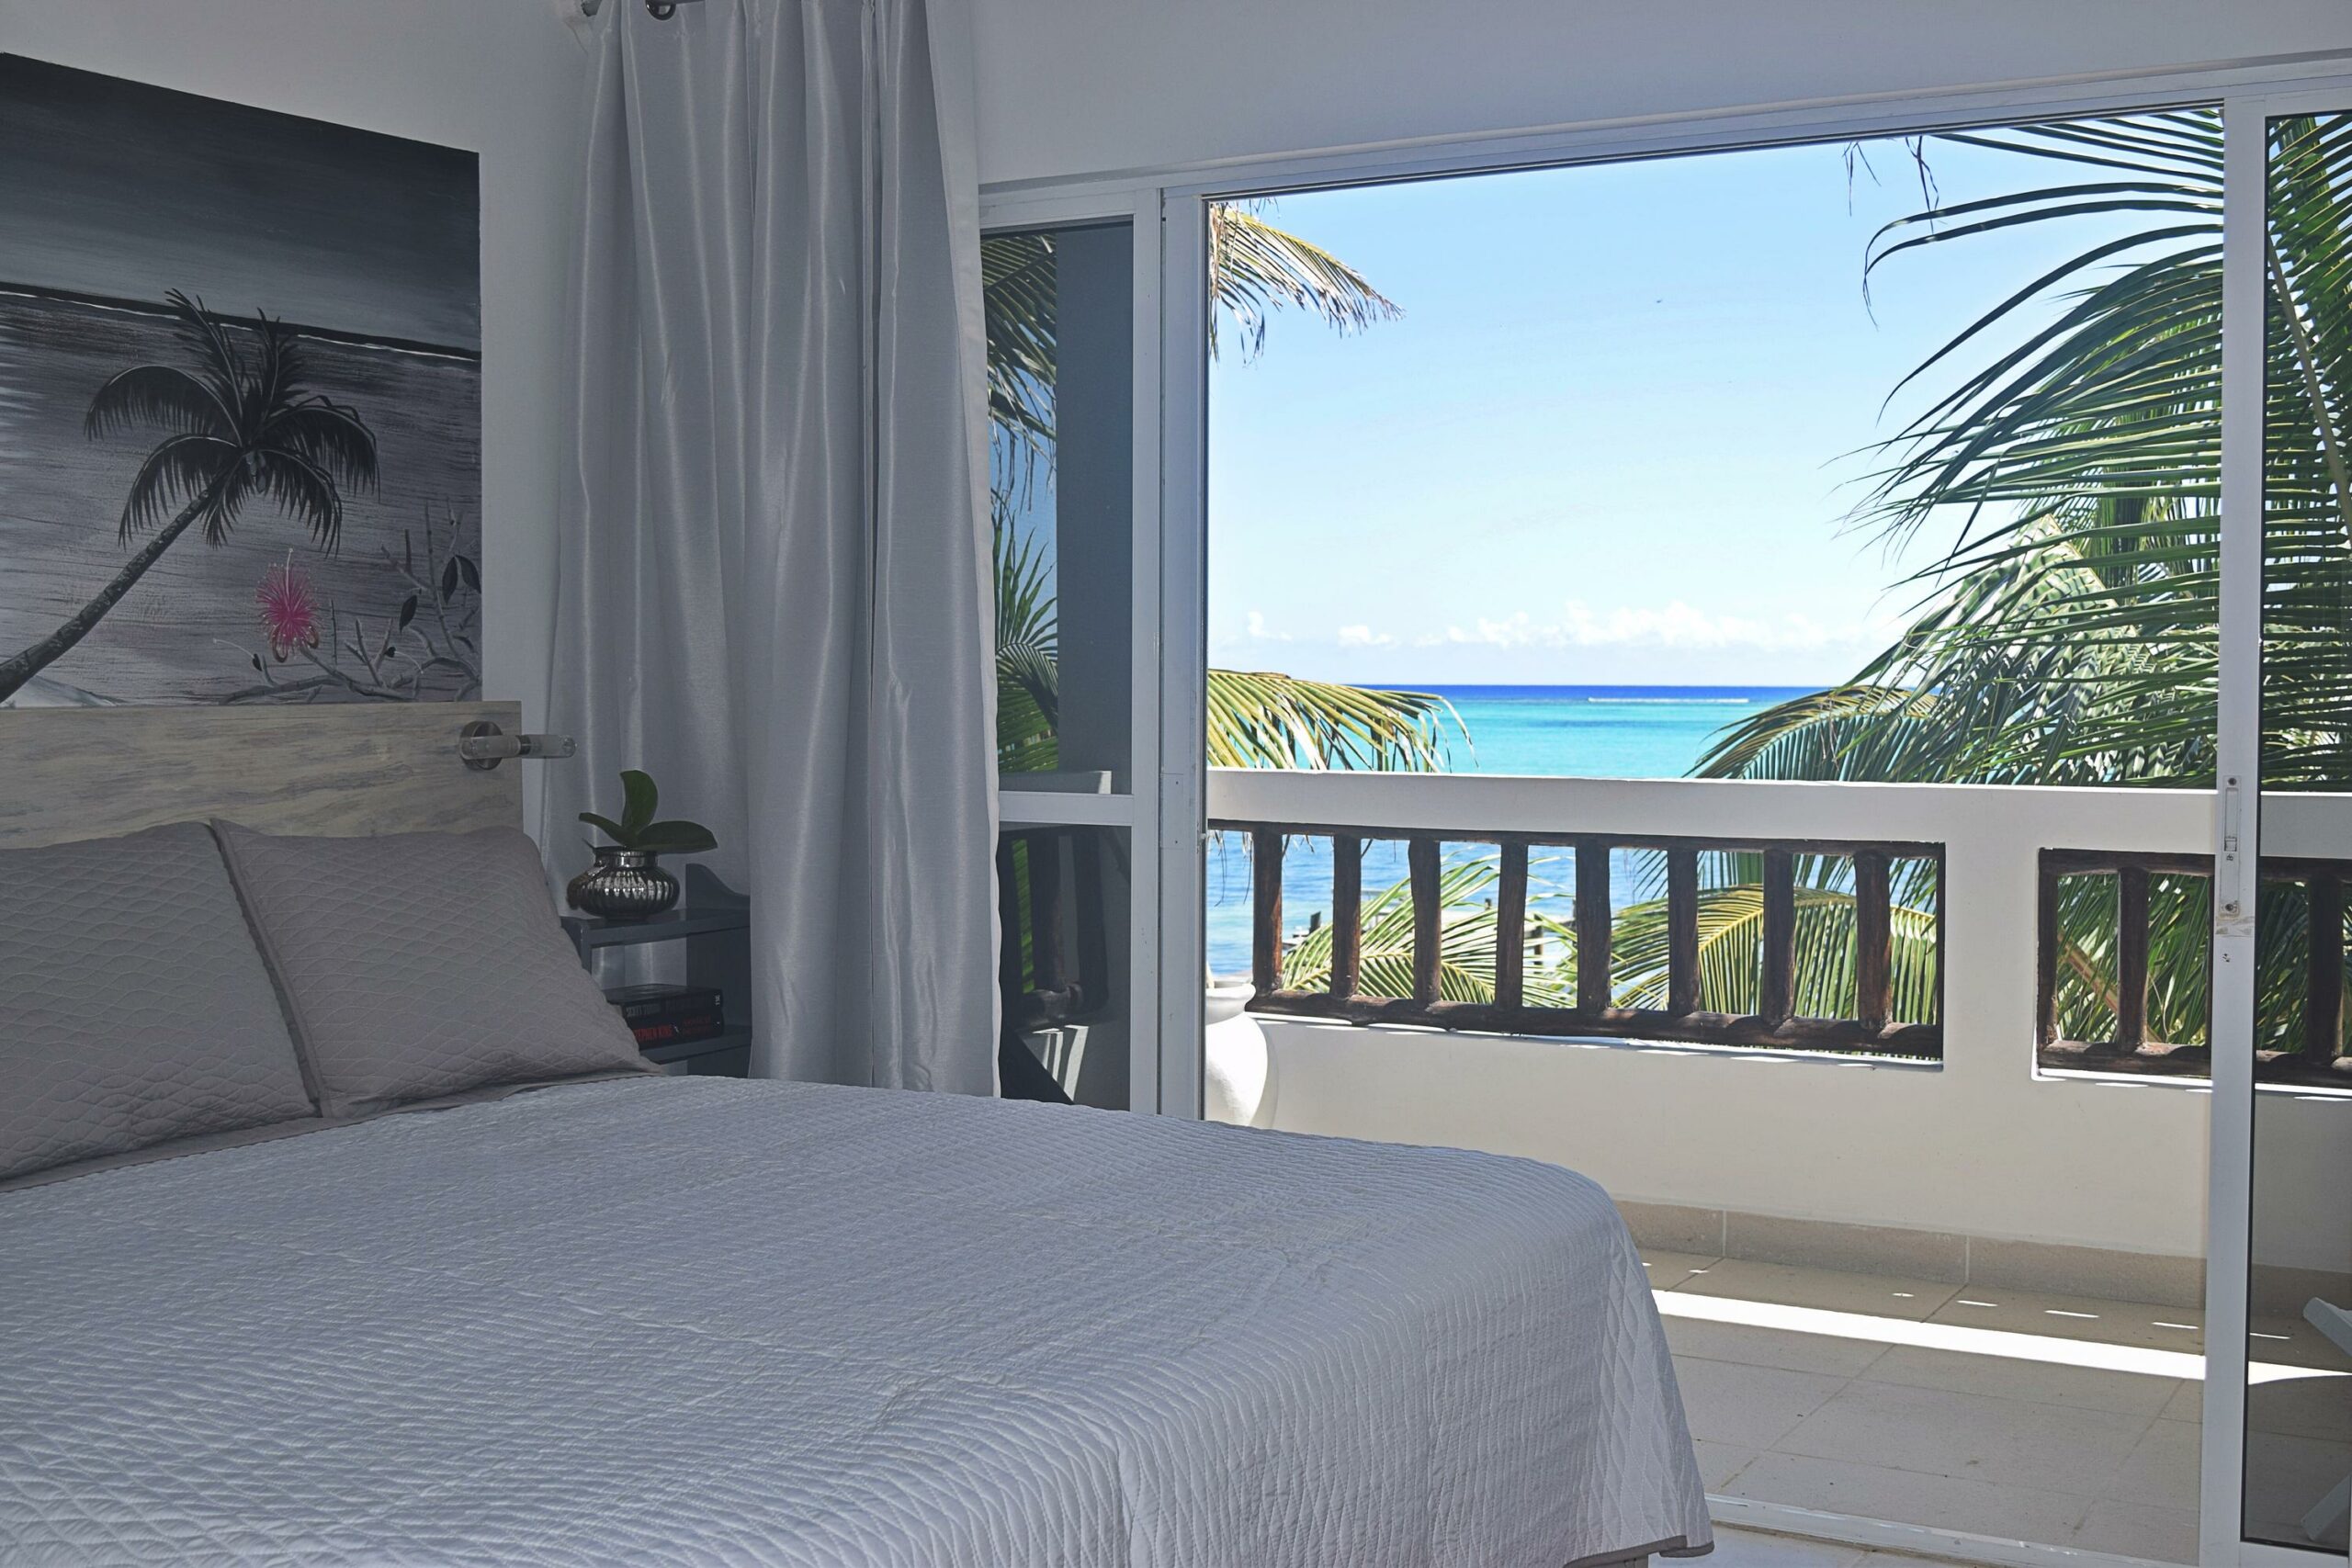 Room with a King Size bed overlooking the Caribbean Sea.